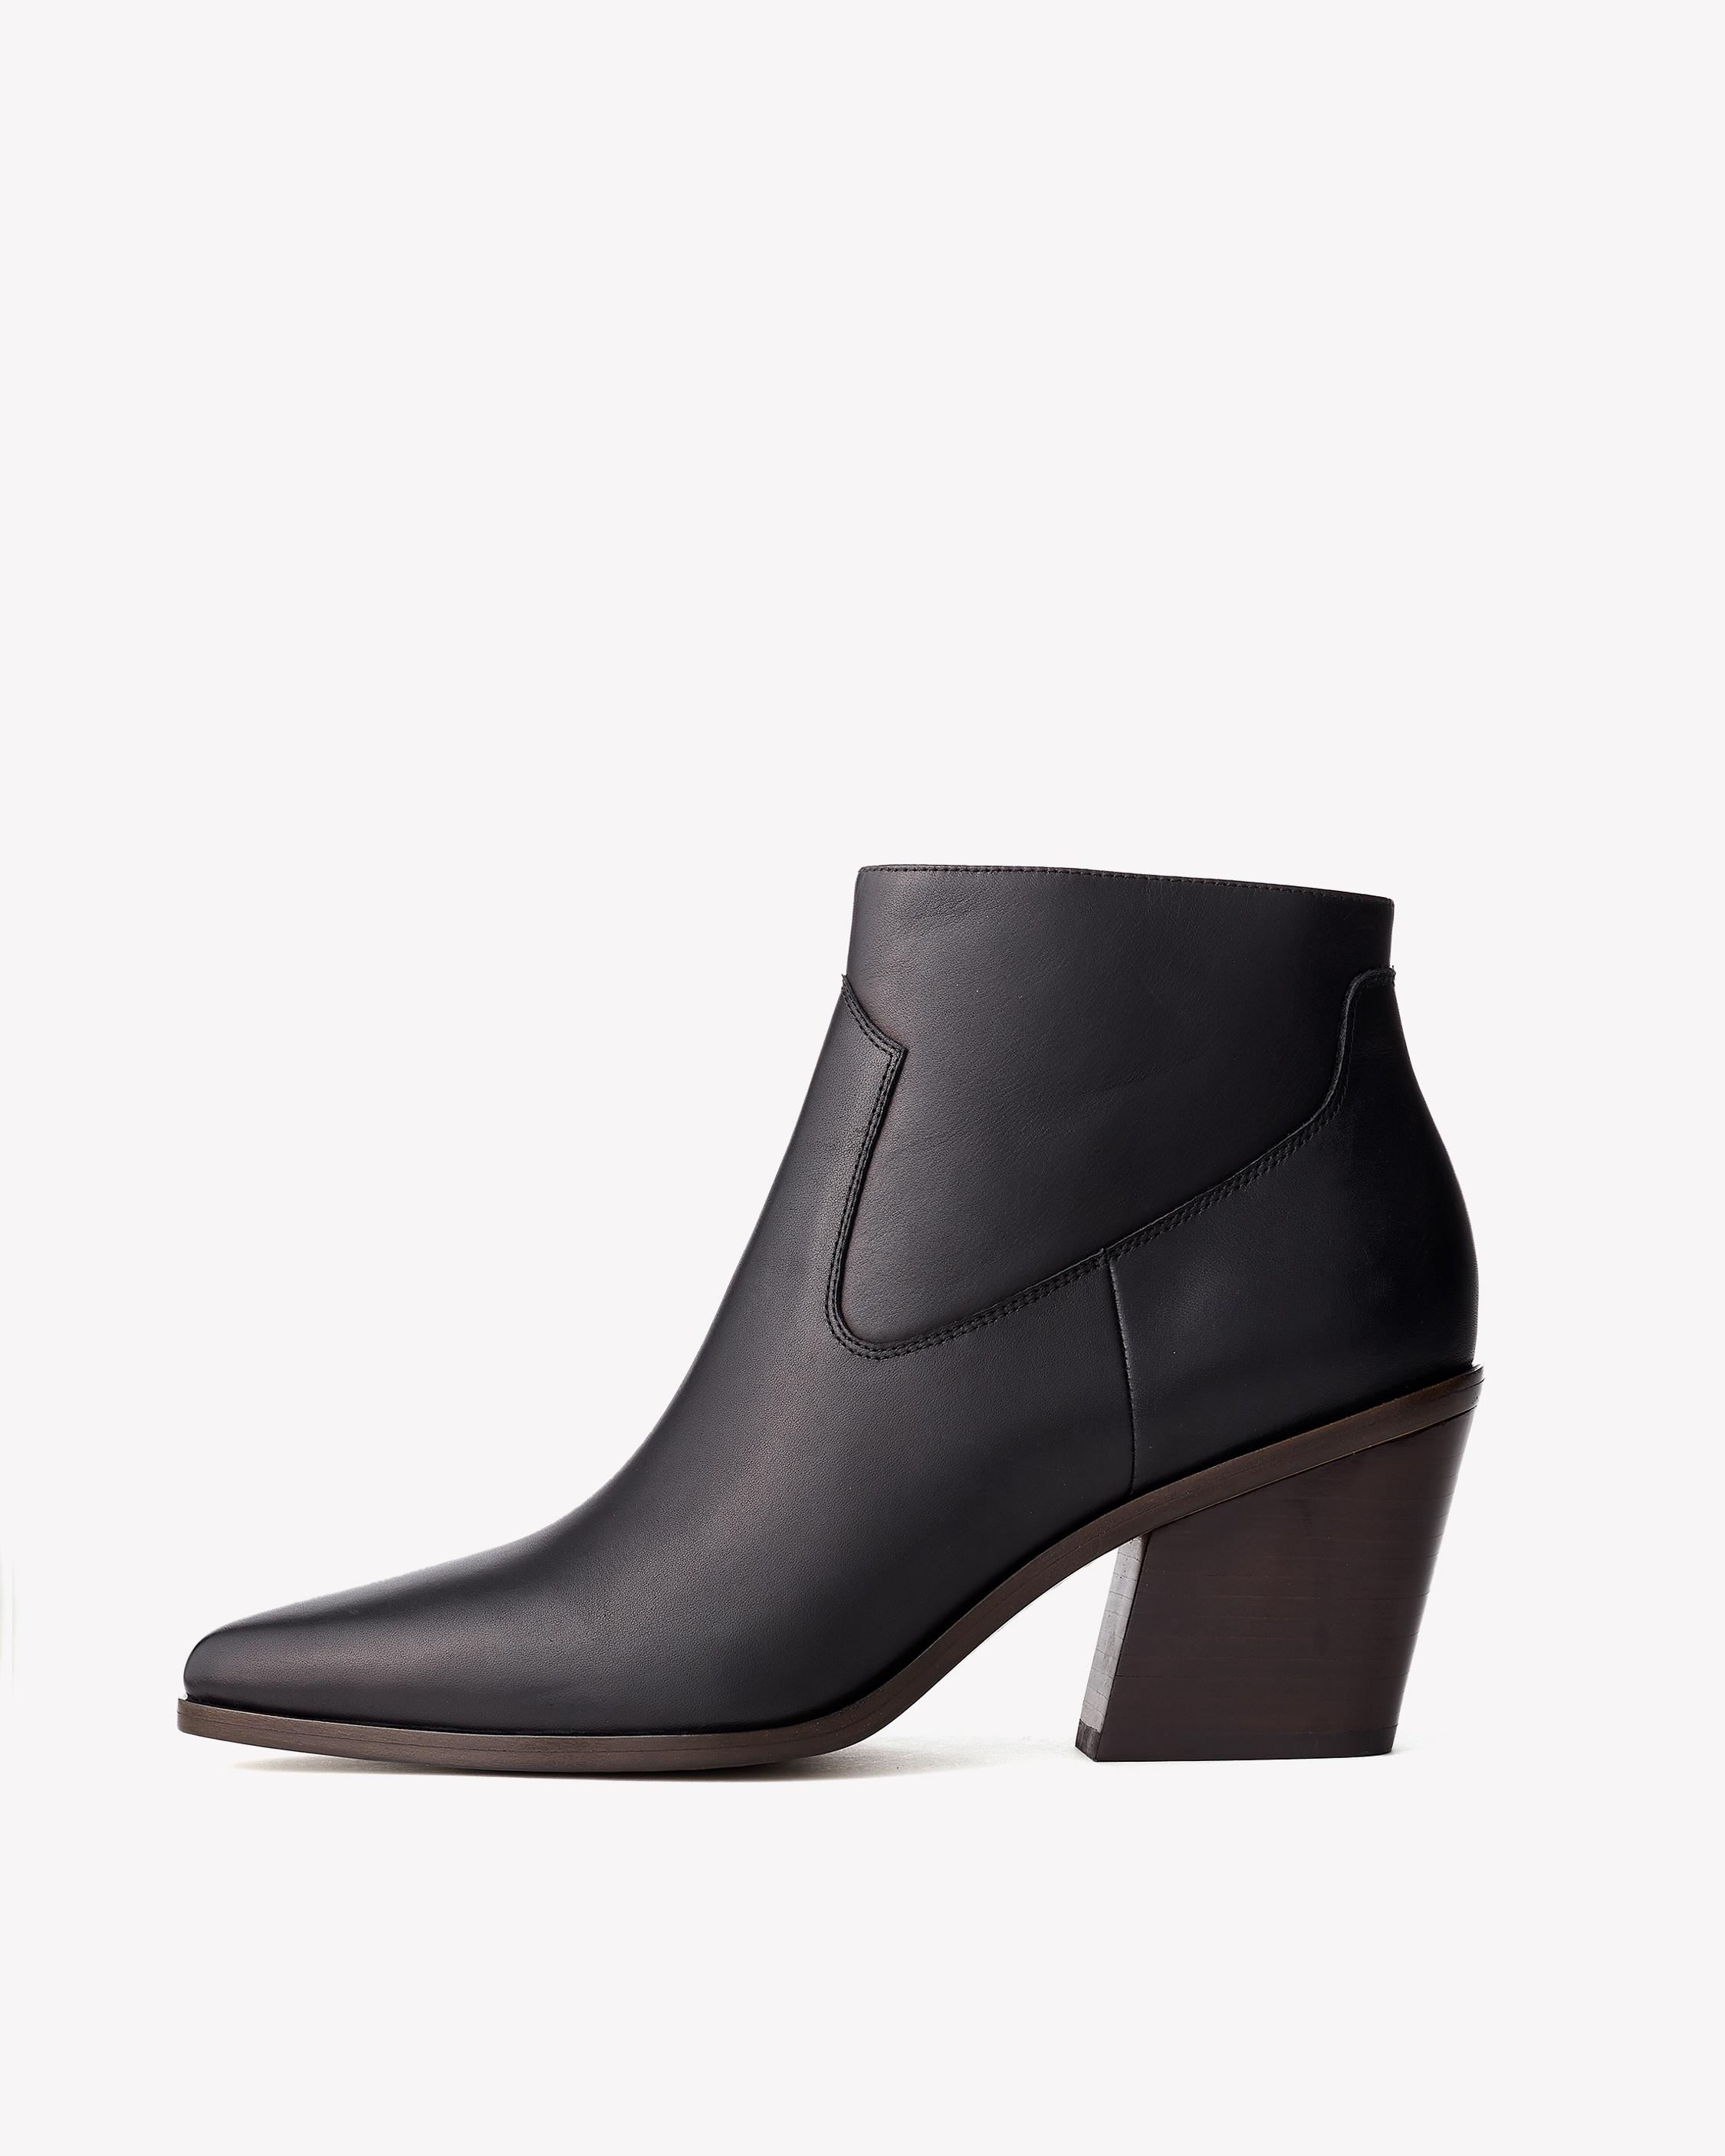 rag and bone boots on sale